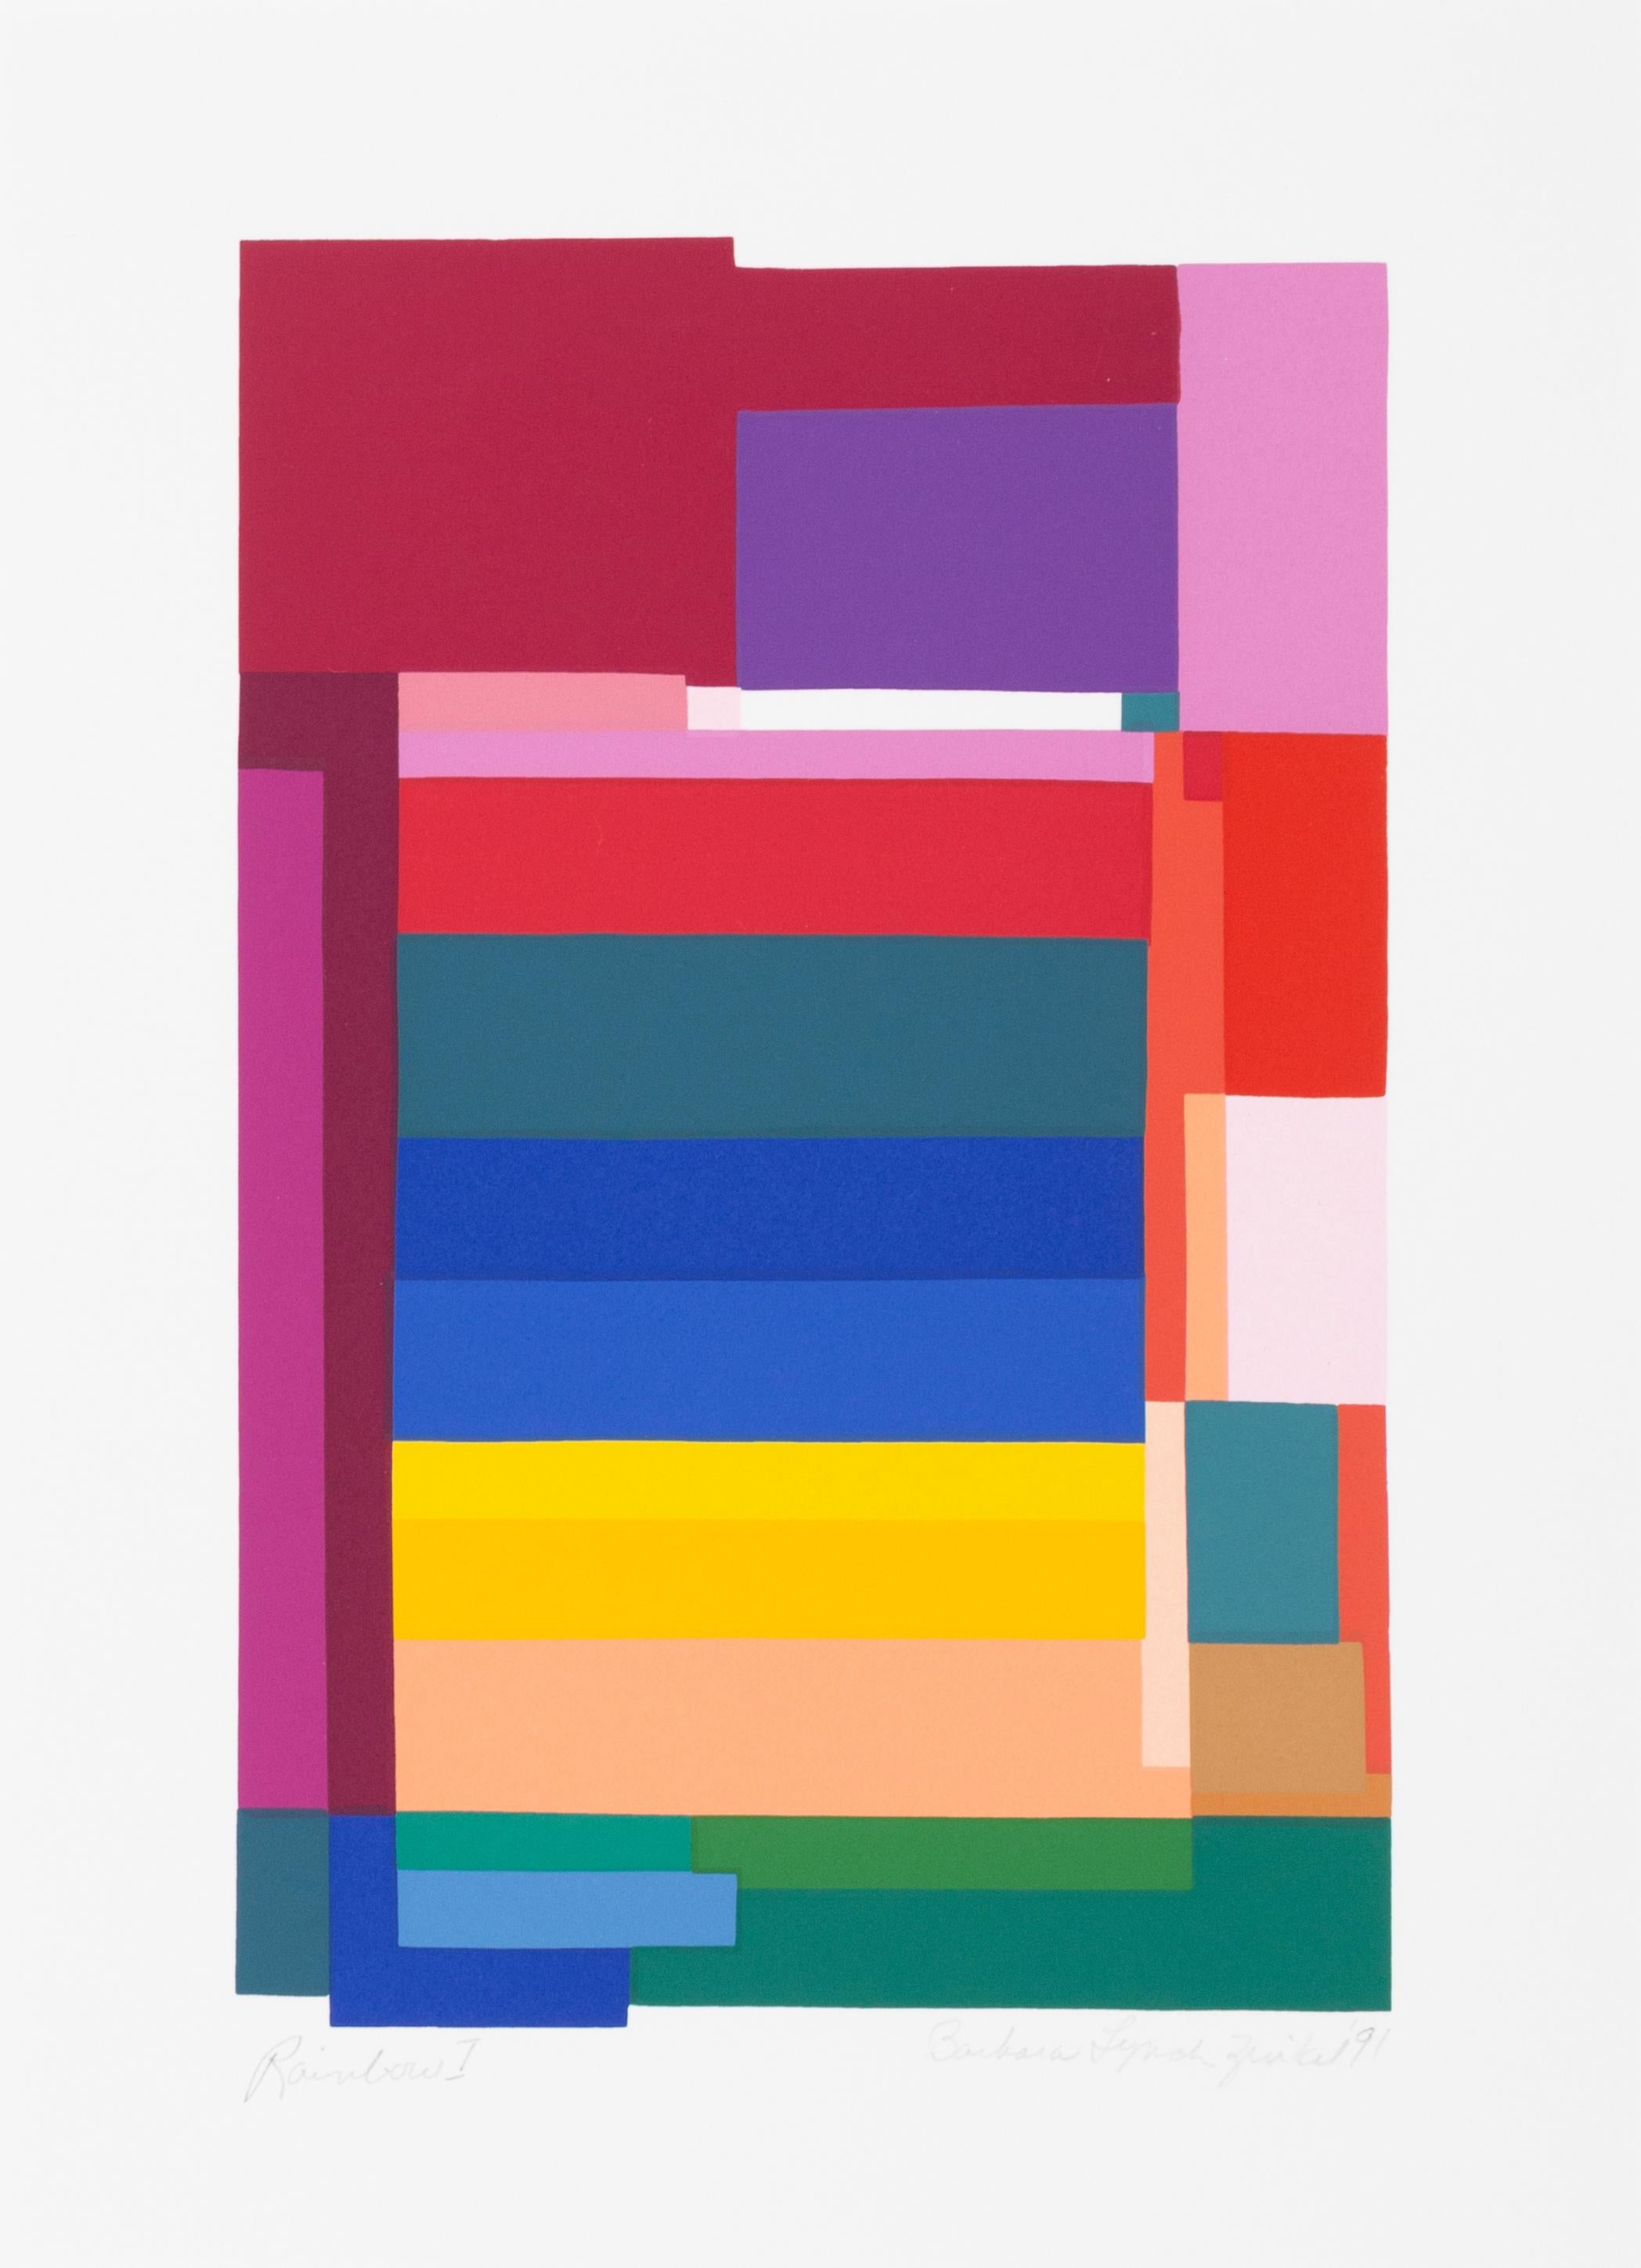 A colorful geometric screenprint by American artist Barbara Lynch Zinkel, signed and numbered in pencil.

Date: 1991
Medium: Screenprint, signed, numbered, dated and titled in pencil
Edition: 250
Image Size: 12 x 7.5 inches
Frame Size : 16 x 10 in.